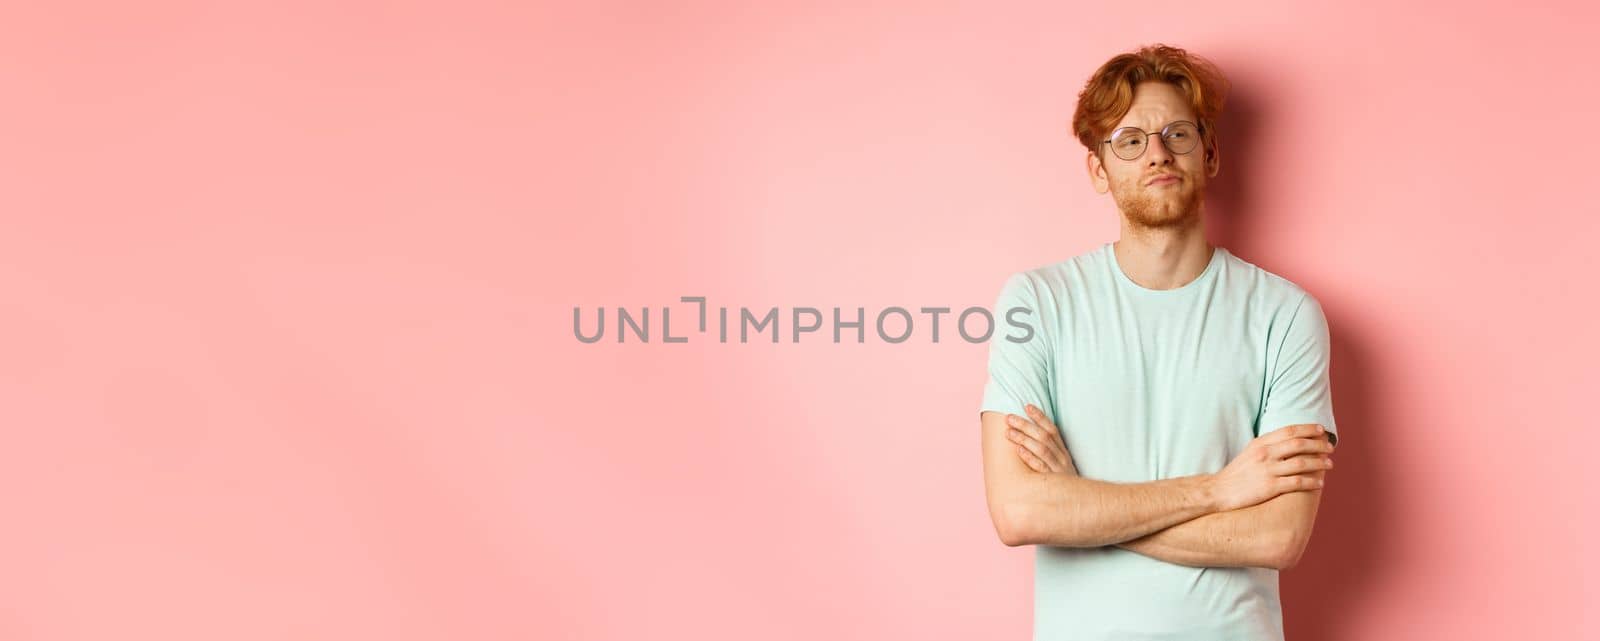 Arrogant redhead guy in glasses cross arms on chest, looking at something with skeptical face, standing over pink background.